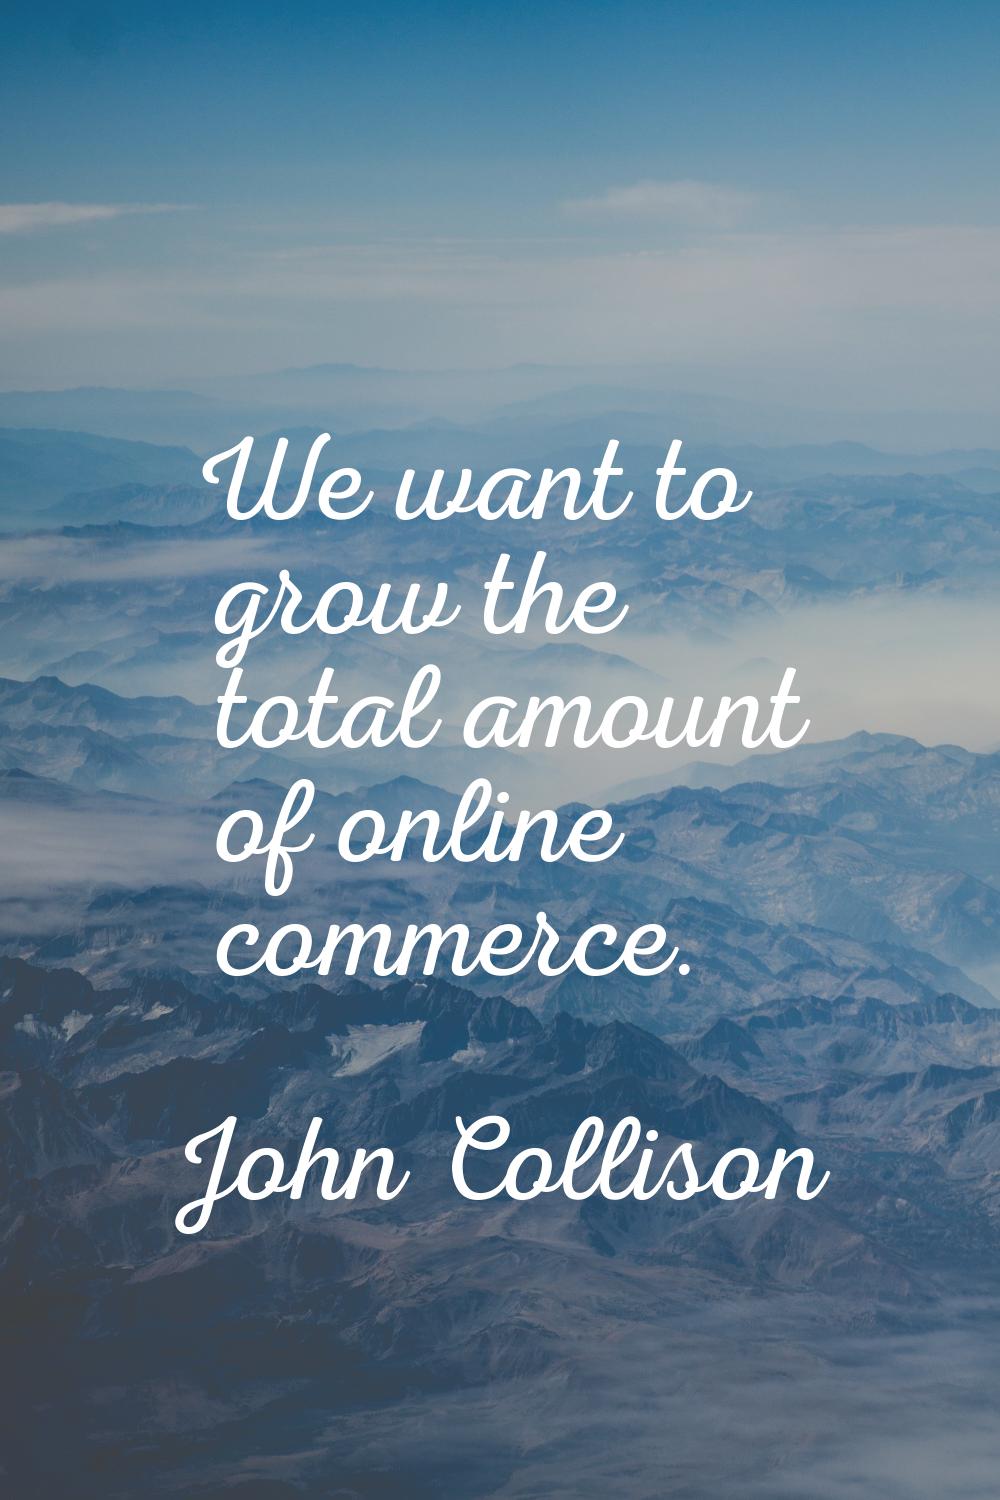 We want to grow the total amount of online commerce.